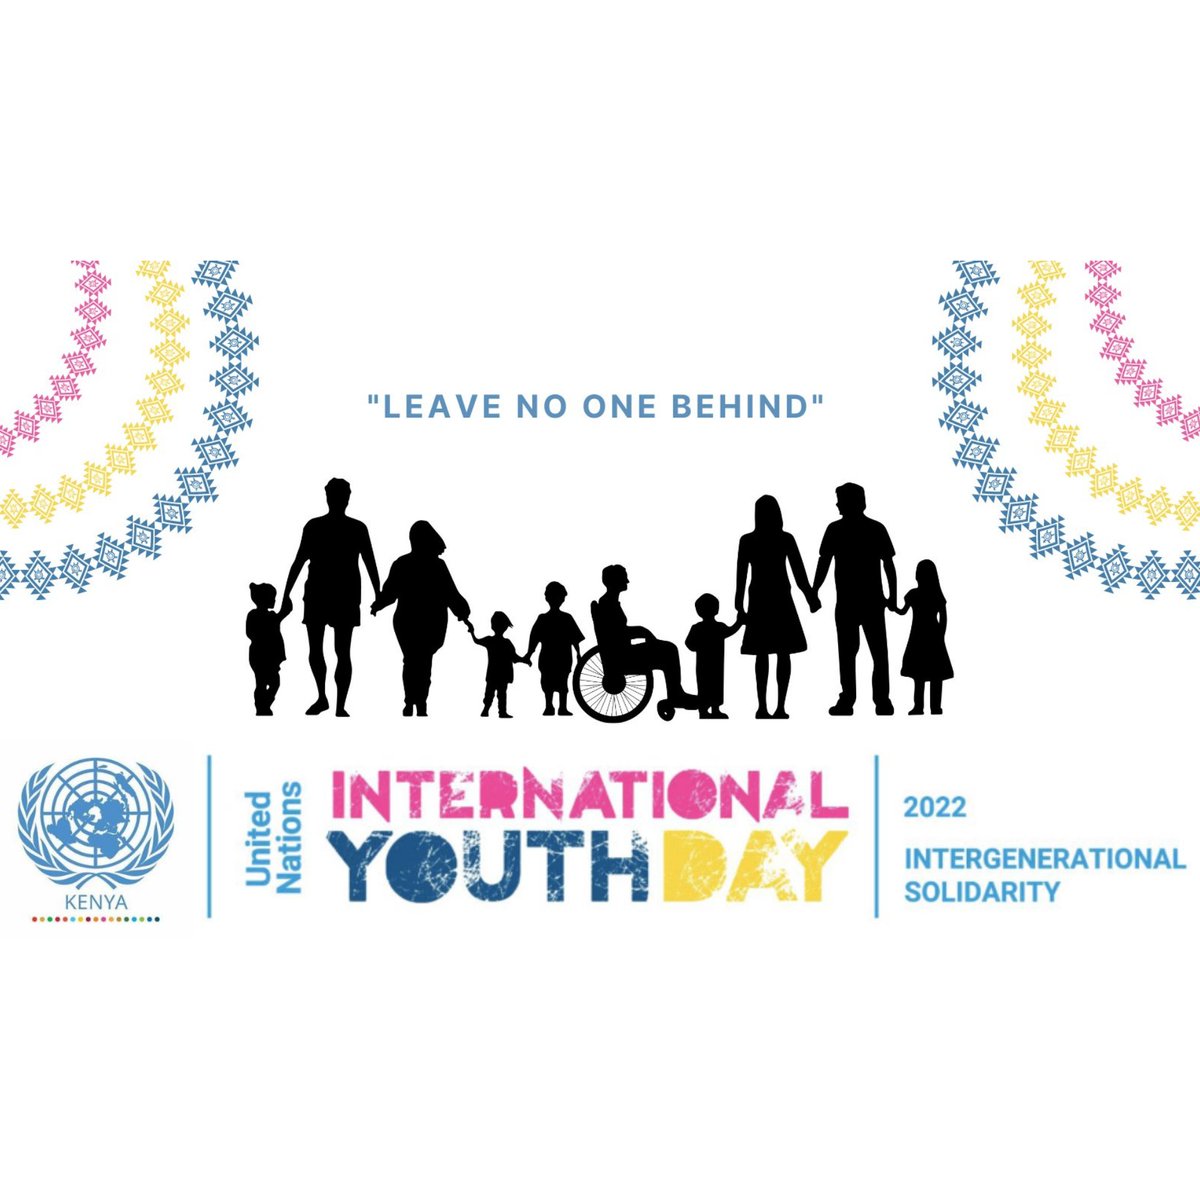 As we mark #InternationalYouthDay2022 & #KenyaDecides2022 , there are reasons to celebrate with many youth winning elective positions in line with the theme #IntergenerationalSolidarity.
Youth need opportunities to keep them away from crime.
#IYD2022
#ActionCountersTerrorism